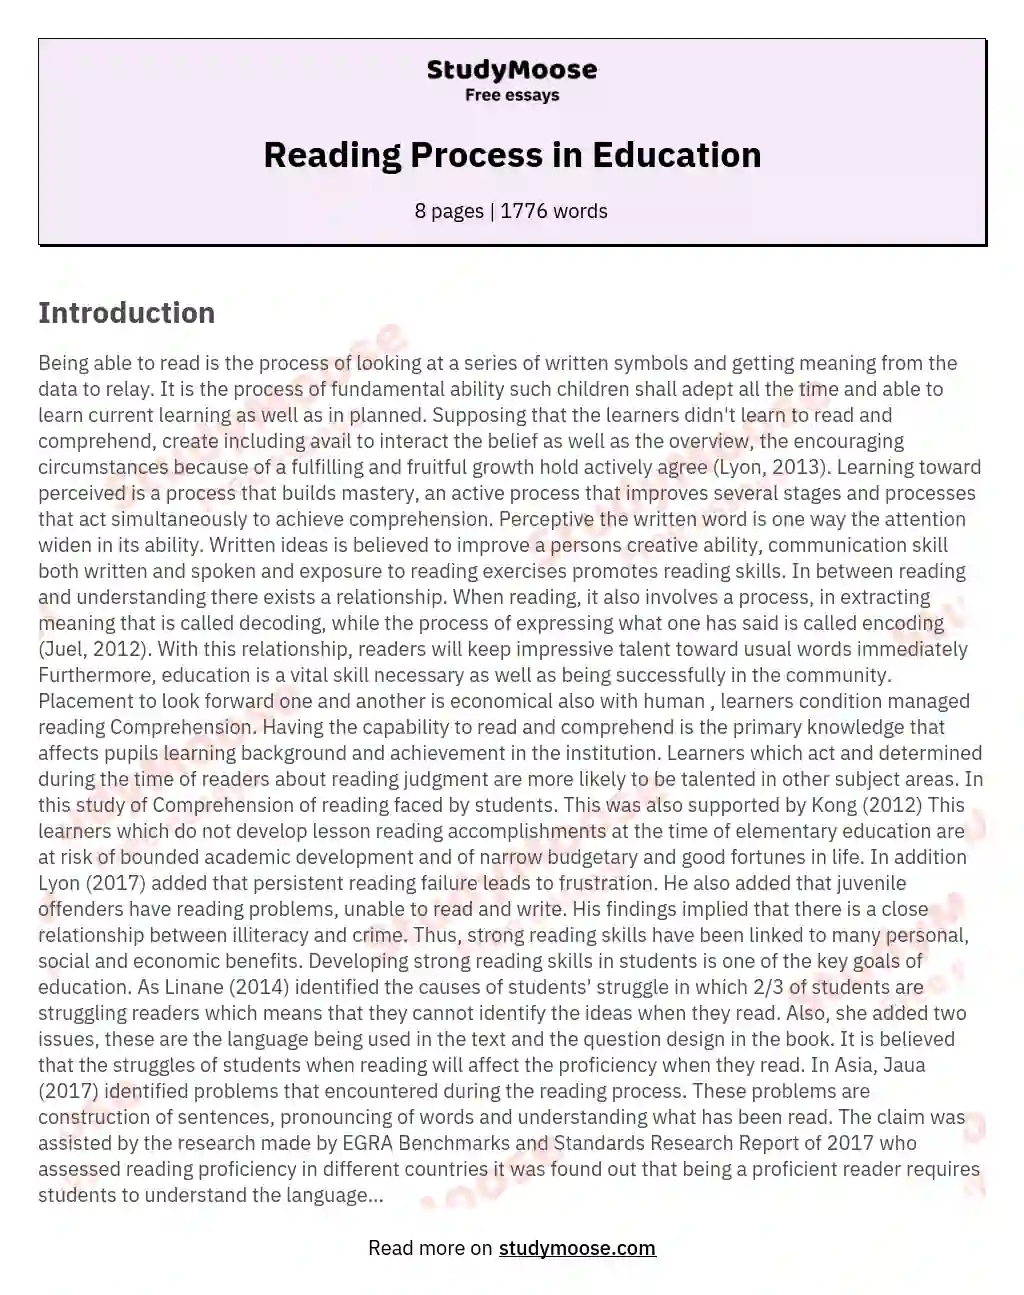 Reading Process in Education essay